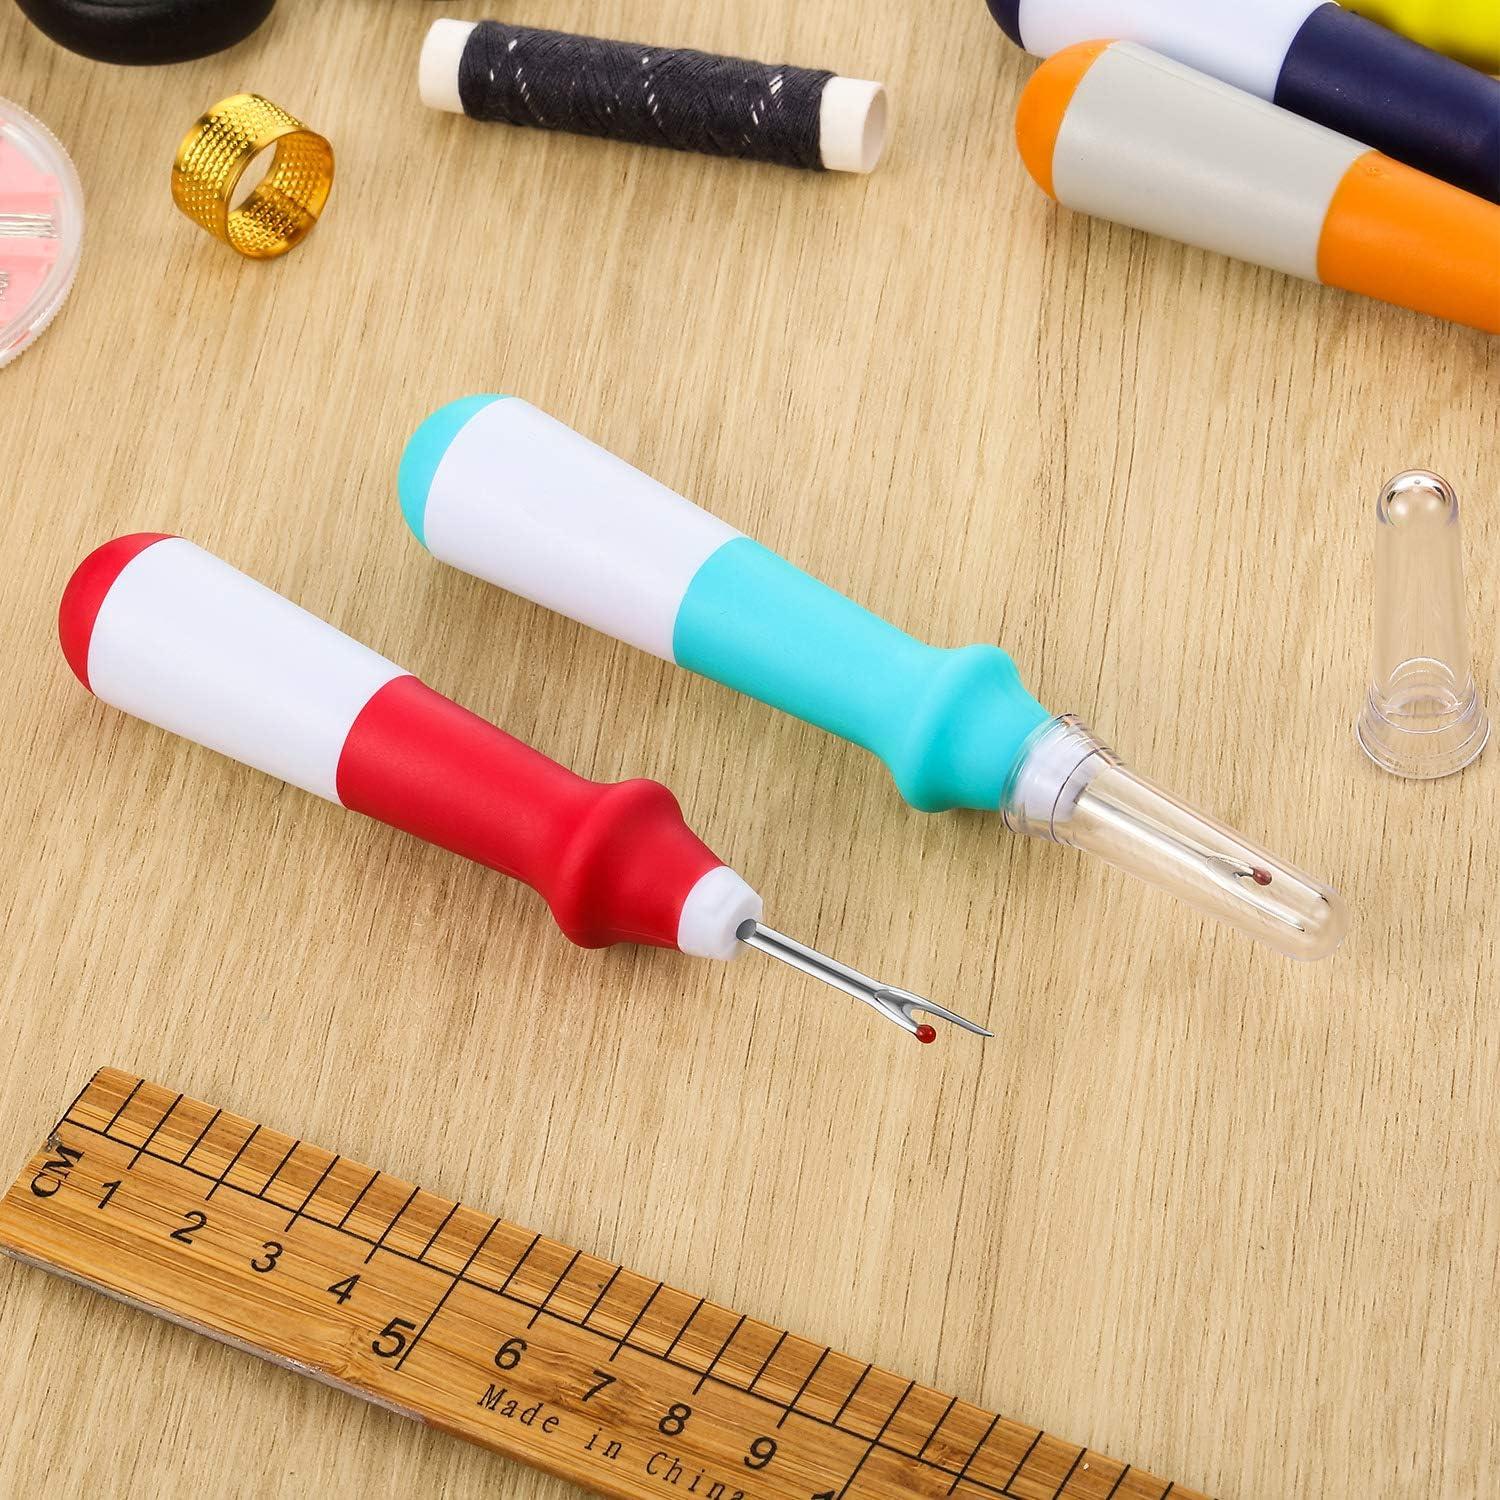 Mudder 5 Pieces Colorful Seam Ripper Large Stitch Ripper Sewing Tool Ergonomic Thread Remover Tool with Handy Handles for Sewing Crafting Embroidery